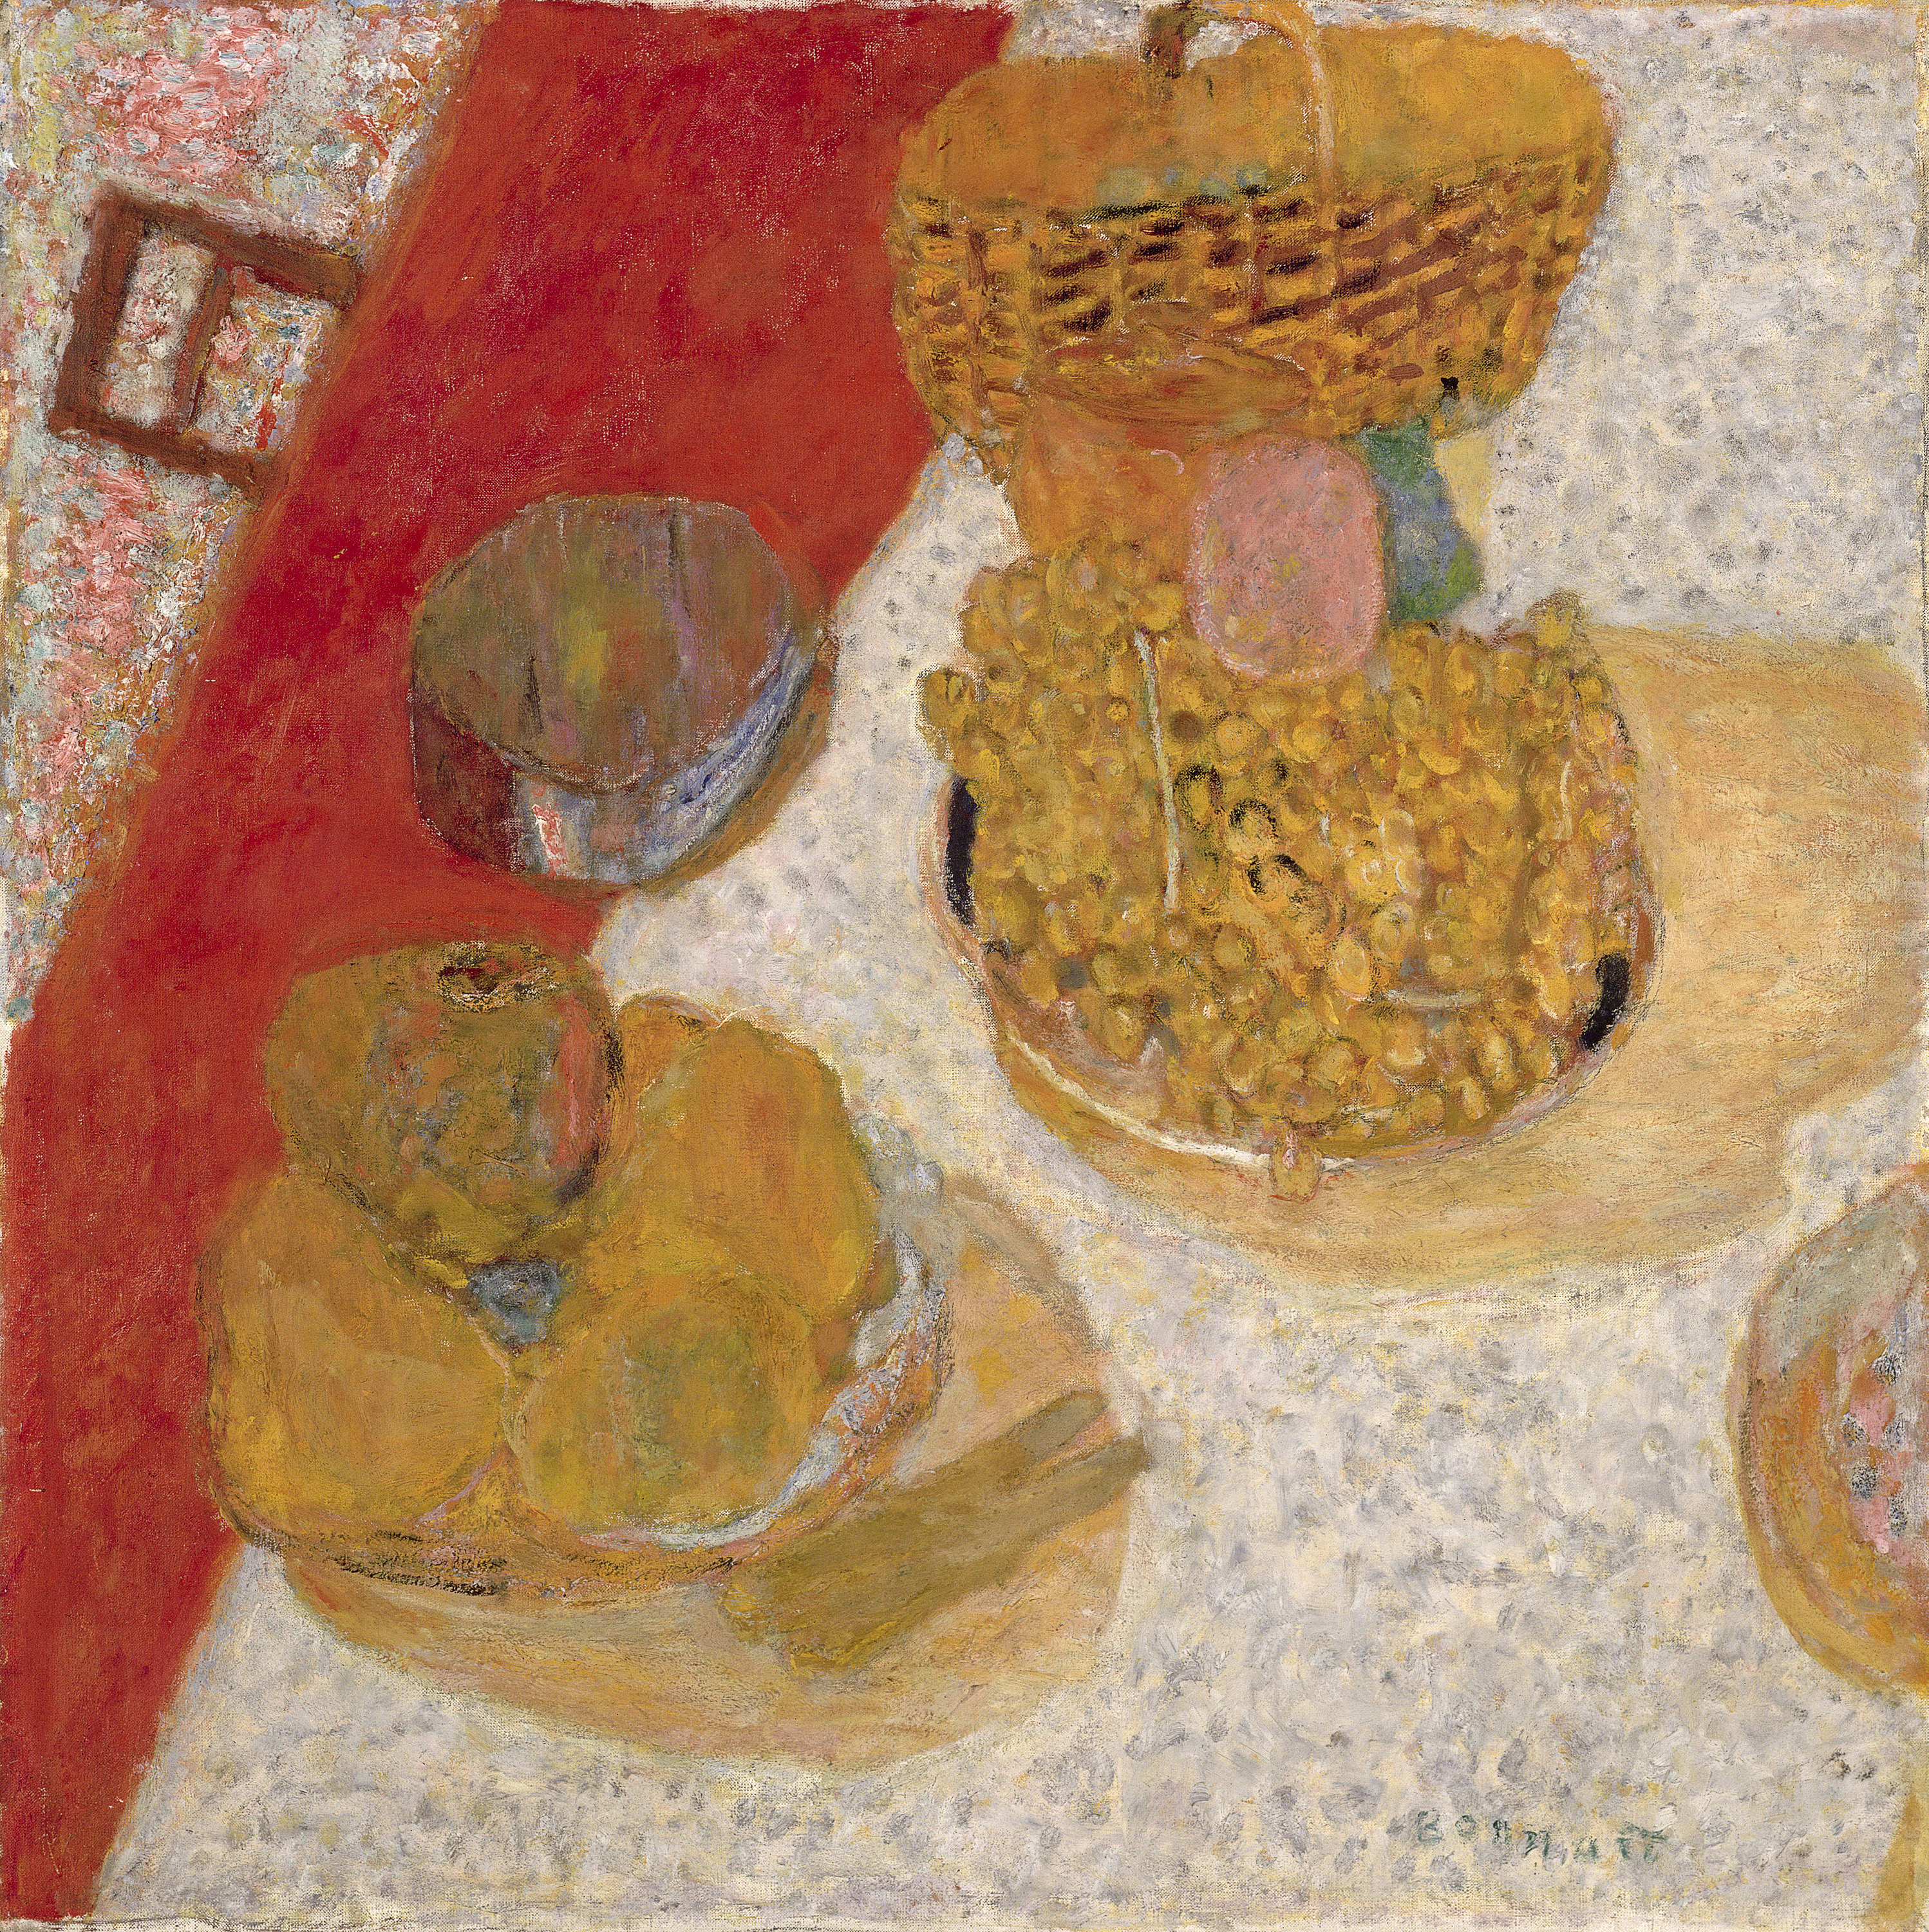 An oil painting of a distorted still life of grapes on a red and white dining table,